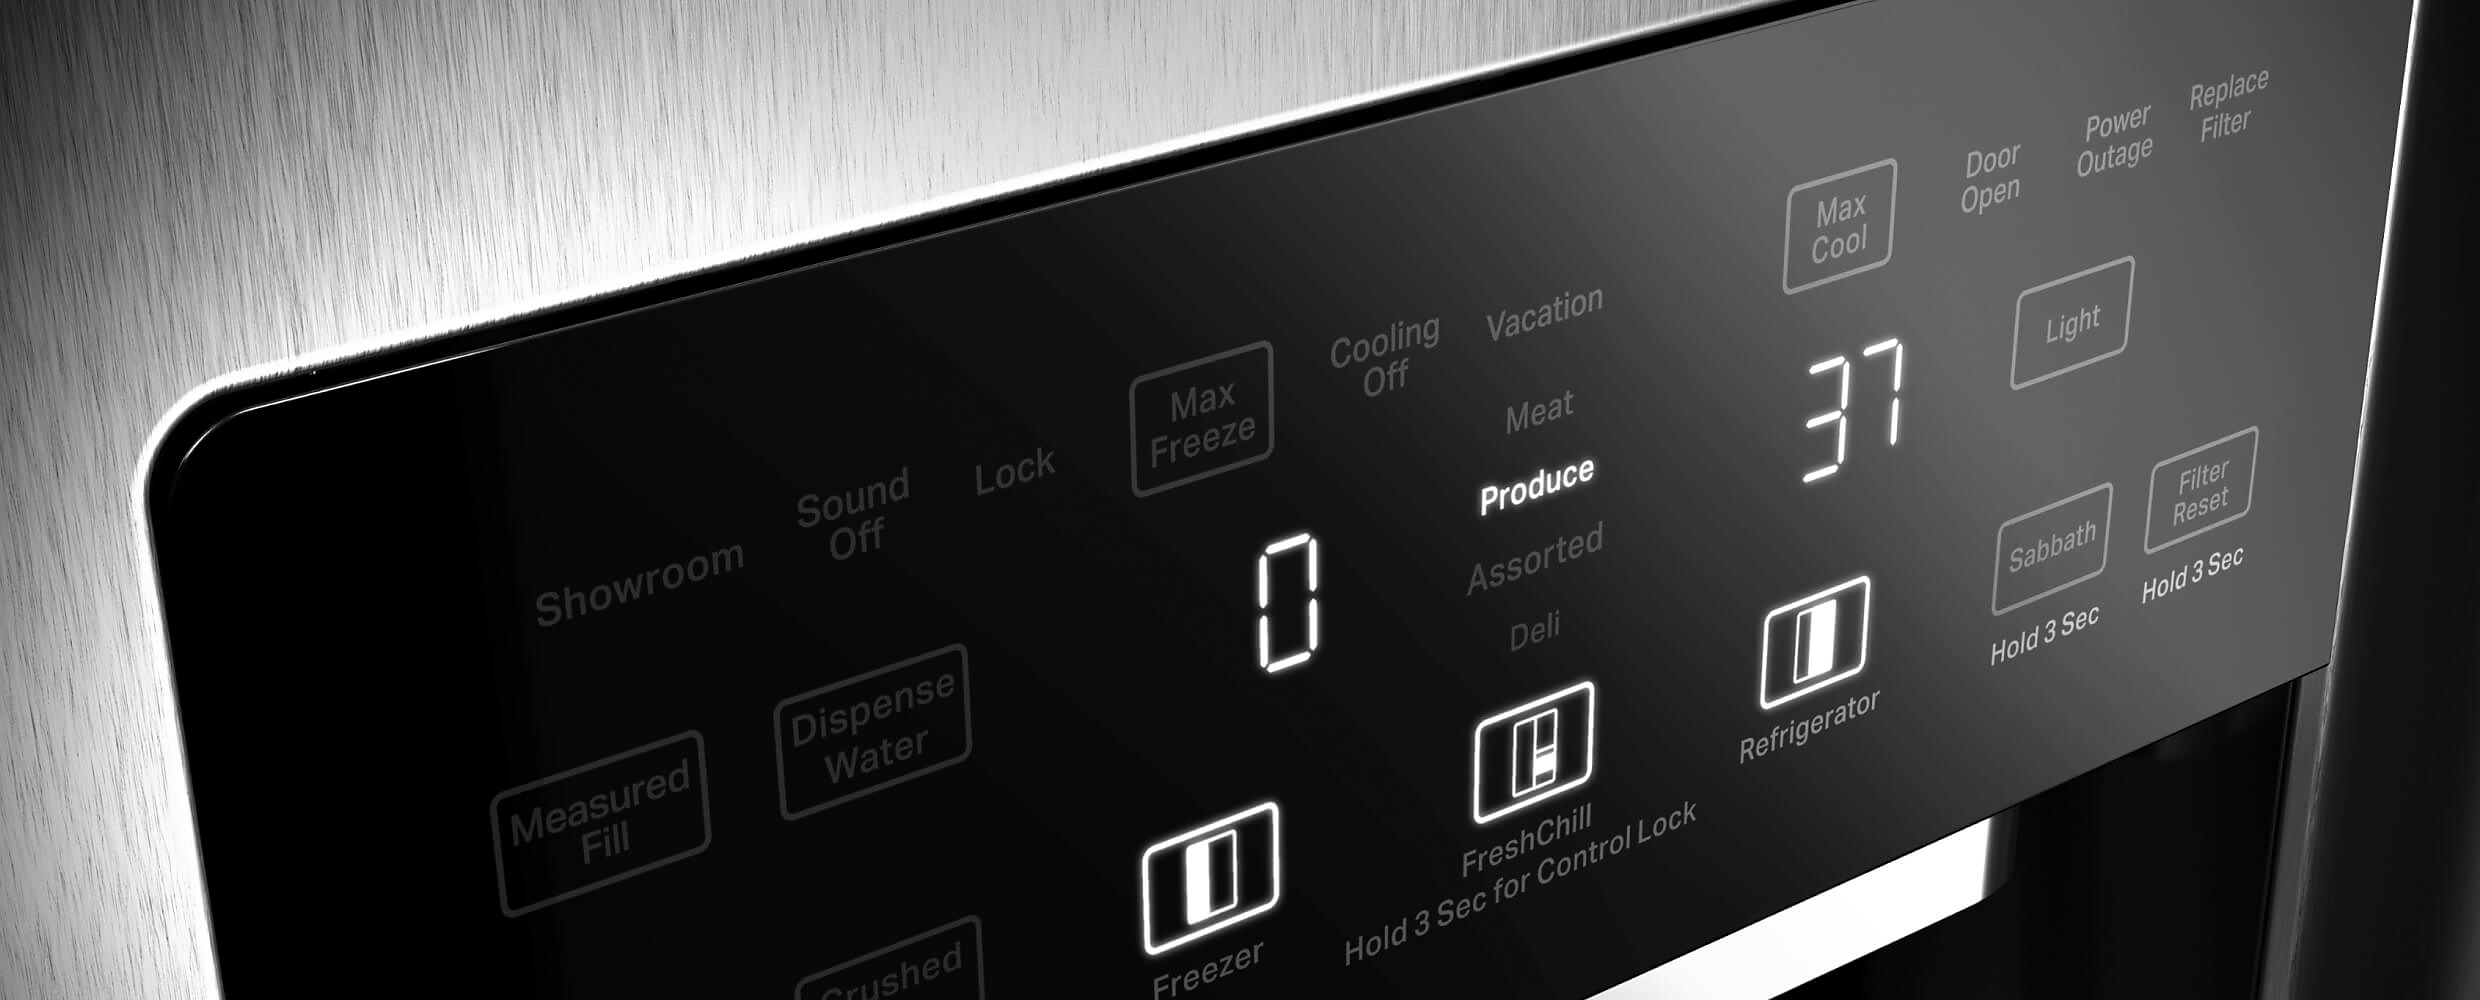 External Touchscreen Controls on the 36" KitchenAid® Built-In Side-by-Side Refrigerator